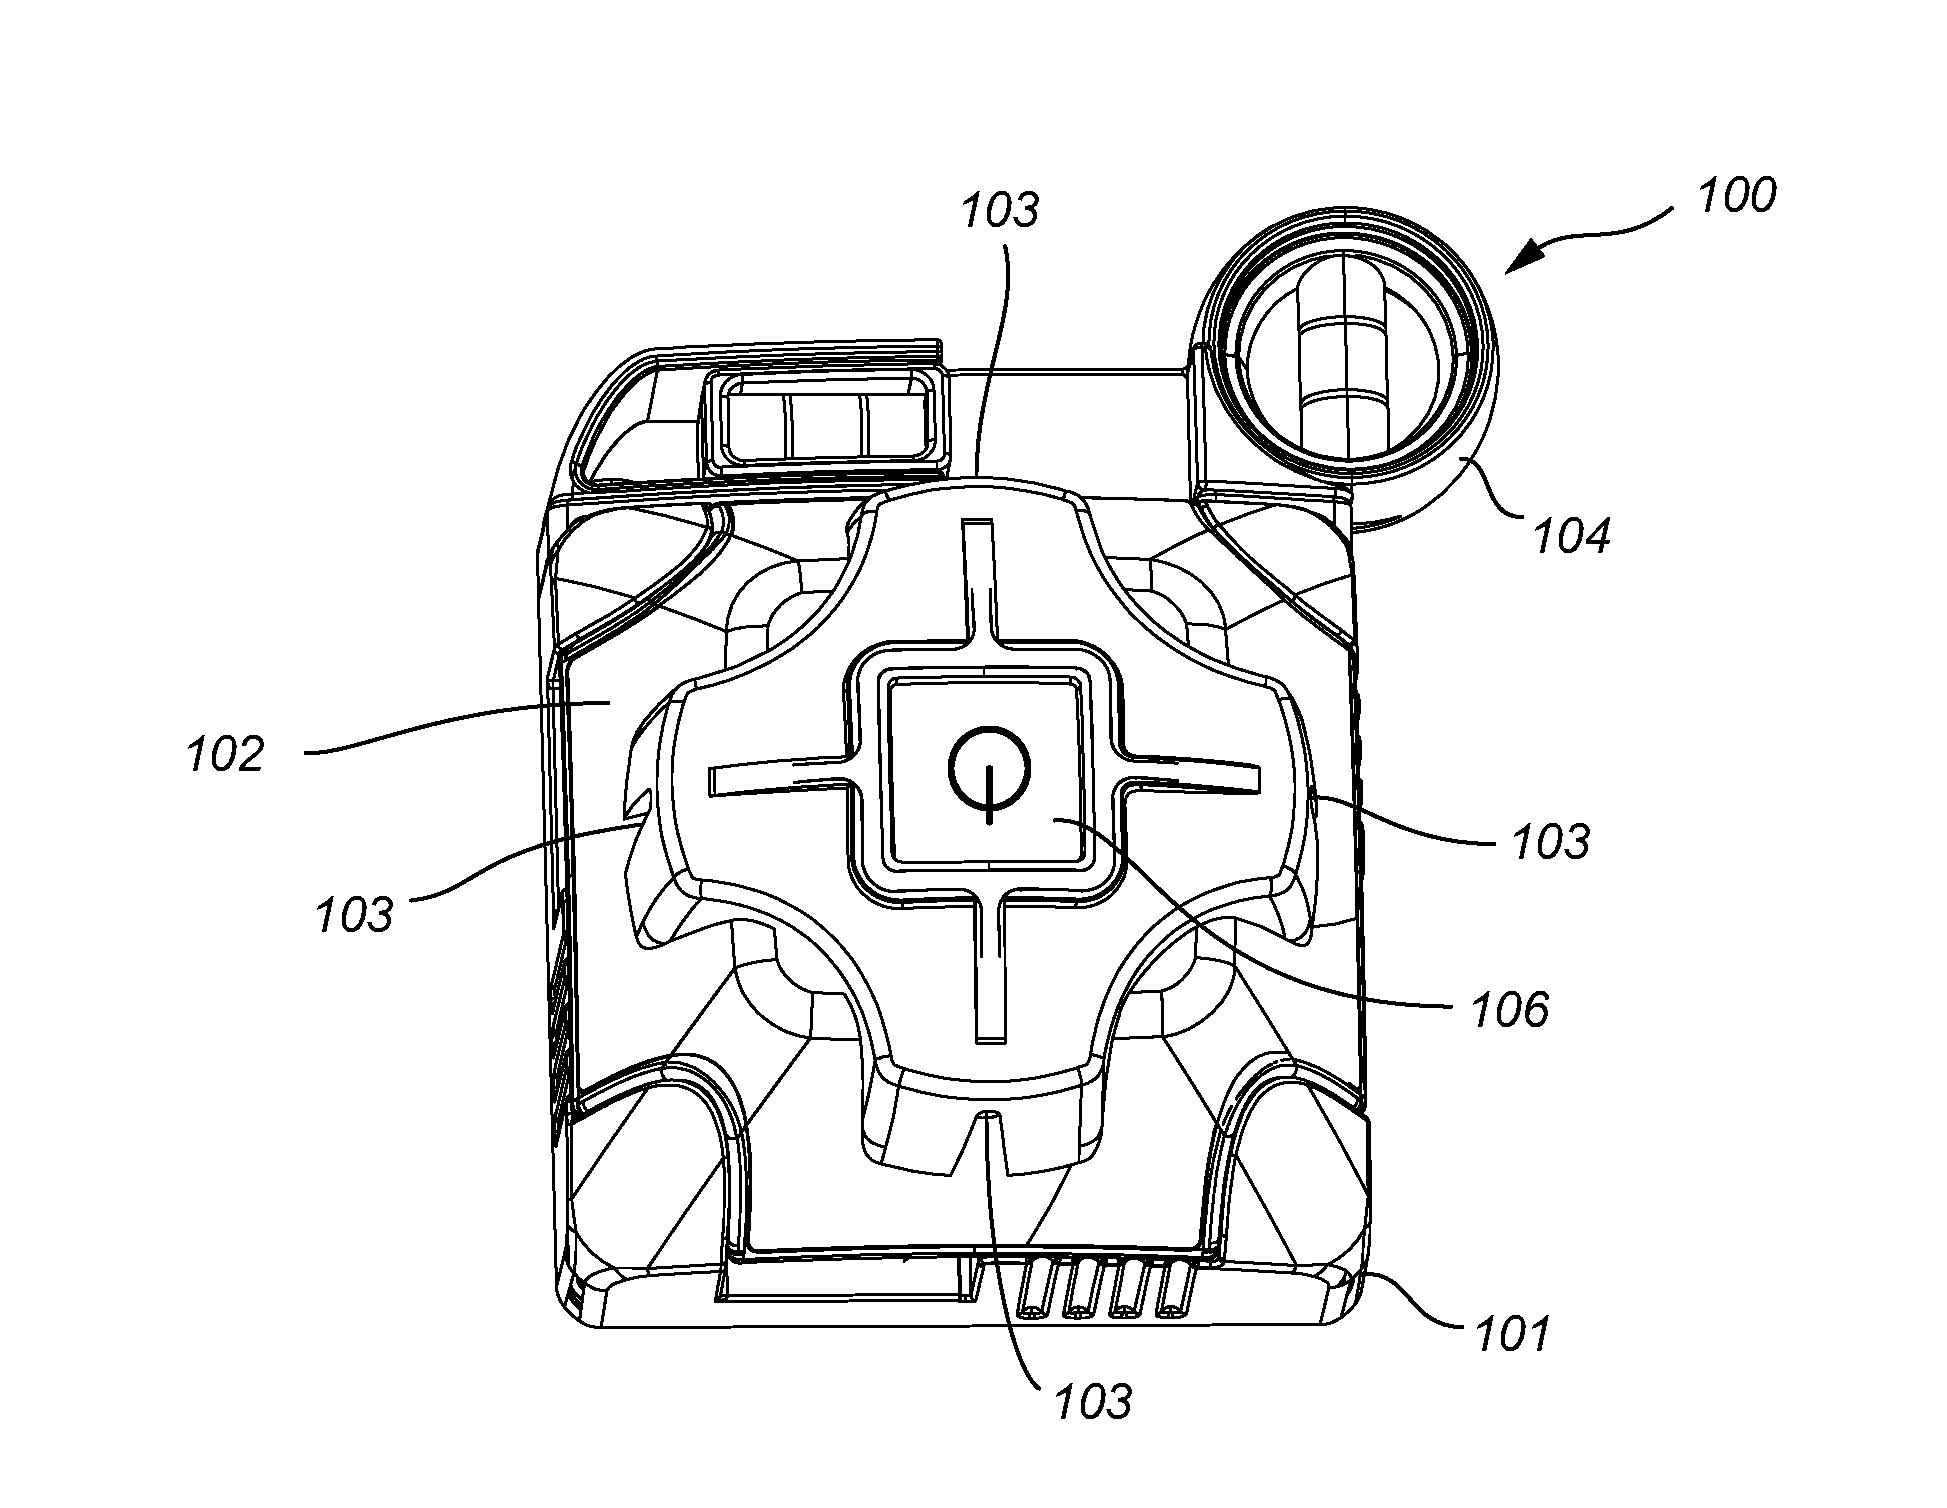 Adjustable laser leveling device with distance measuring lasers and self-leveling lasers and related method